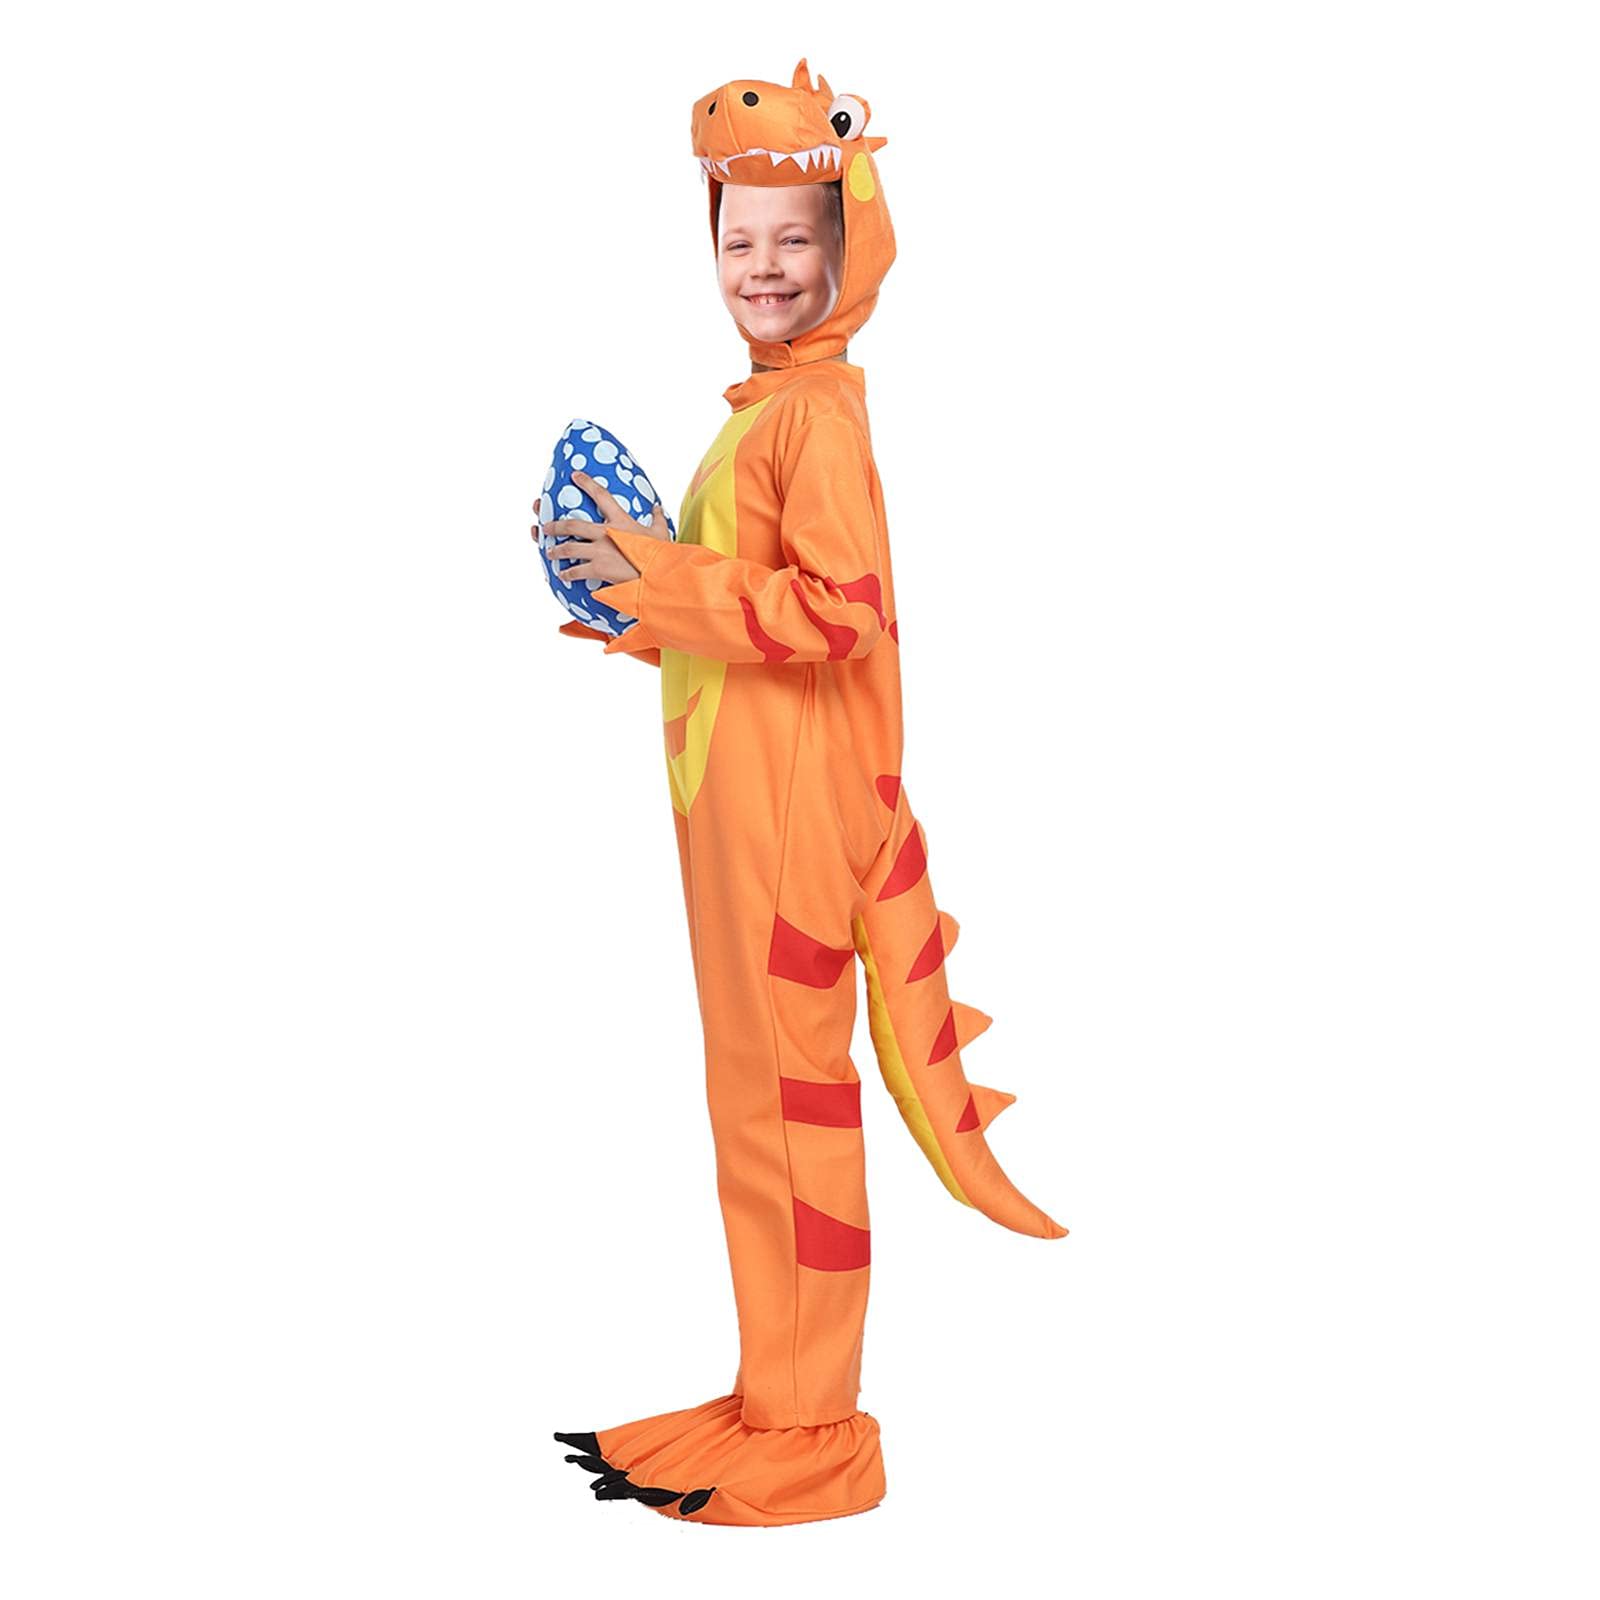 Twister.CK Kids Dinosaur Costume for Halloween Dinosaur Dress Up Party and Role Play,Available in 3 Kids Sizes T S M